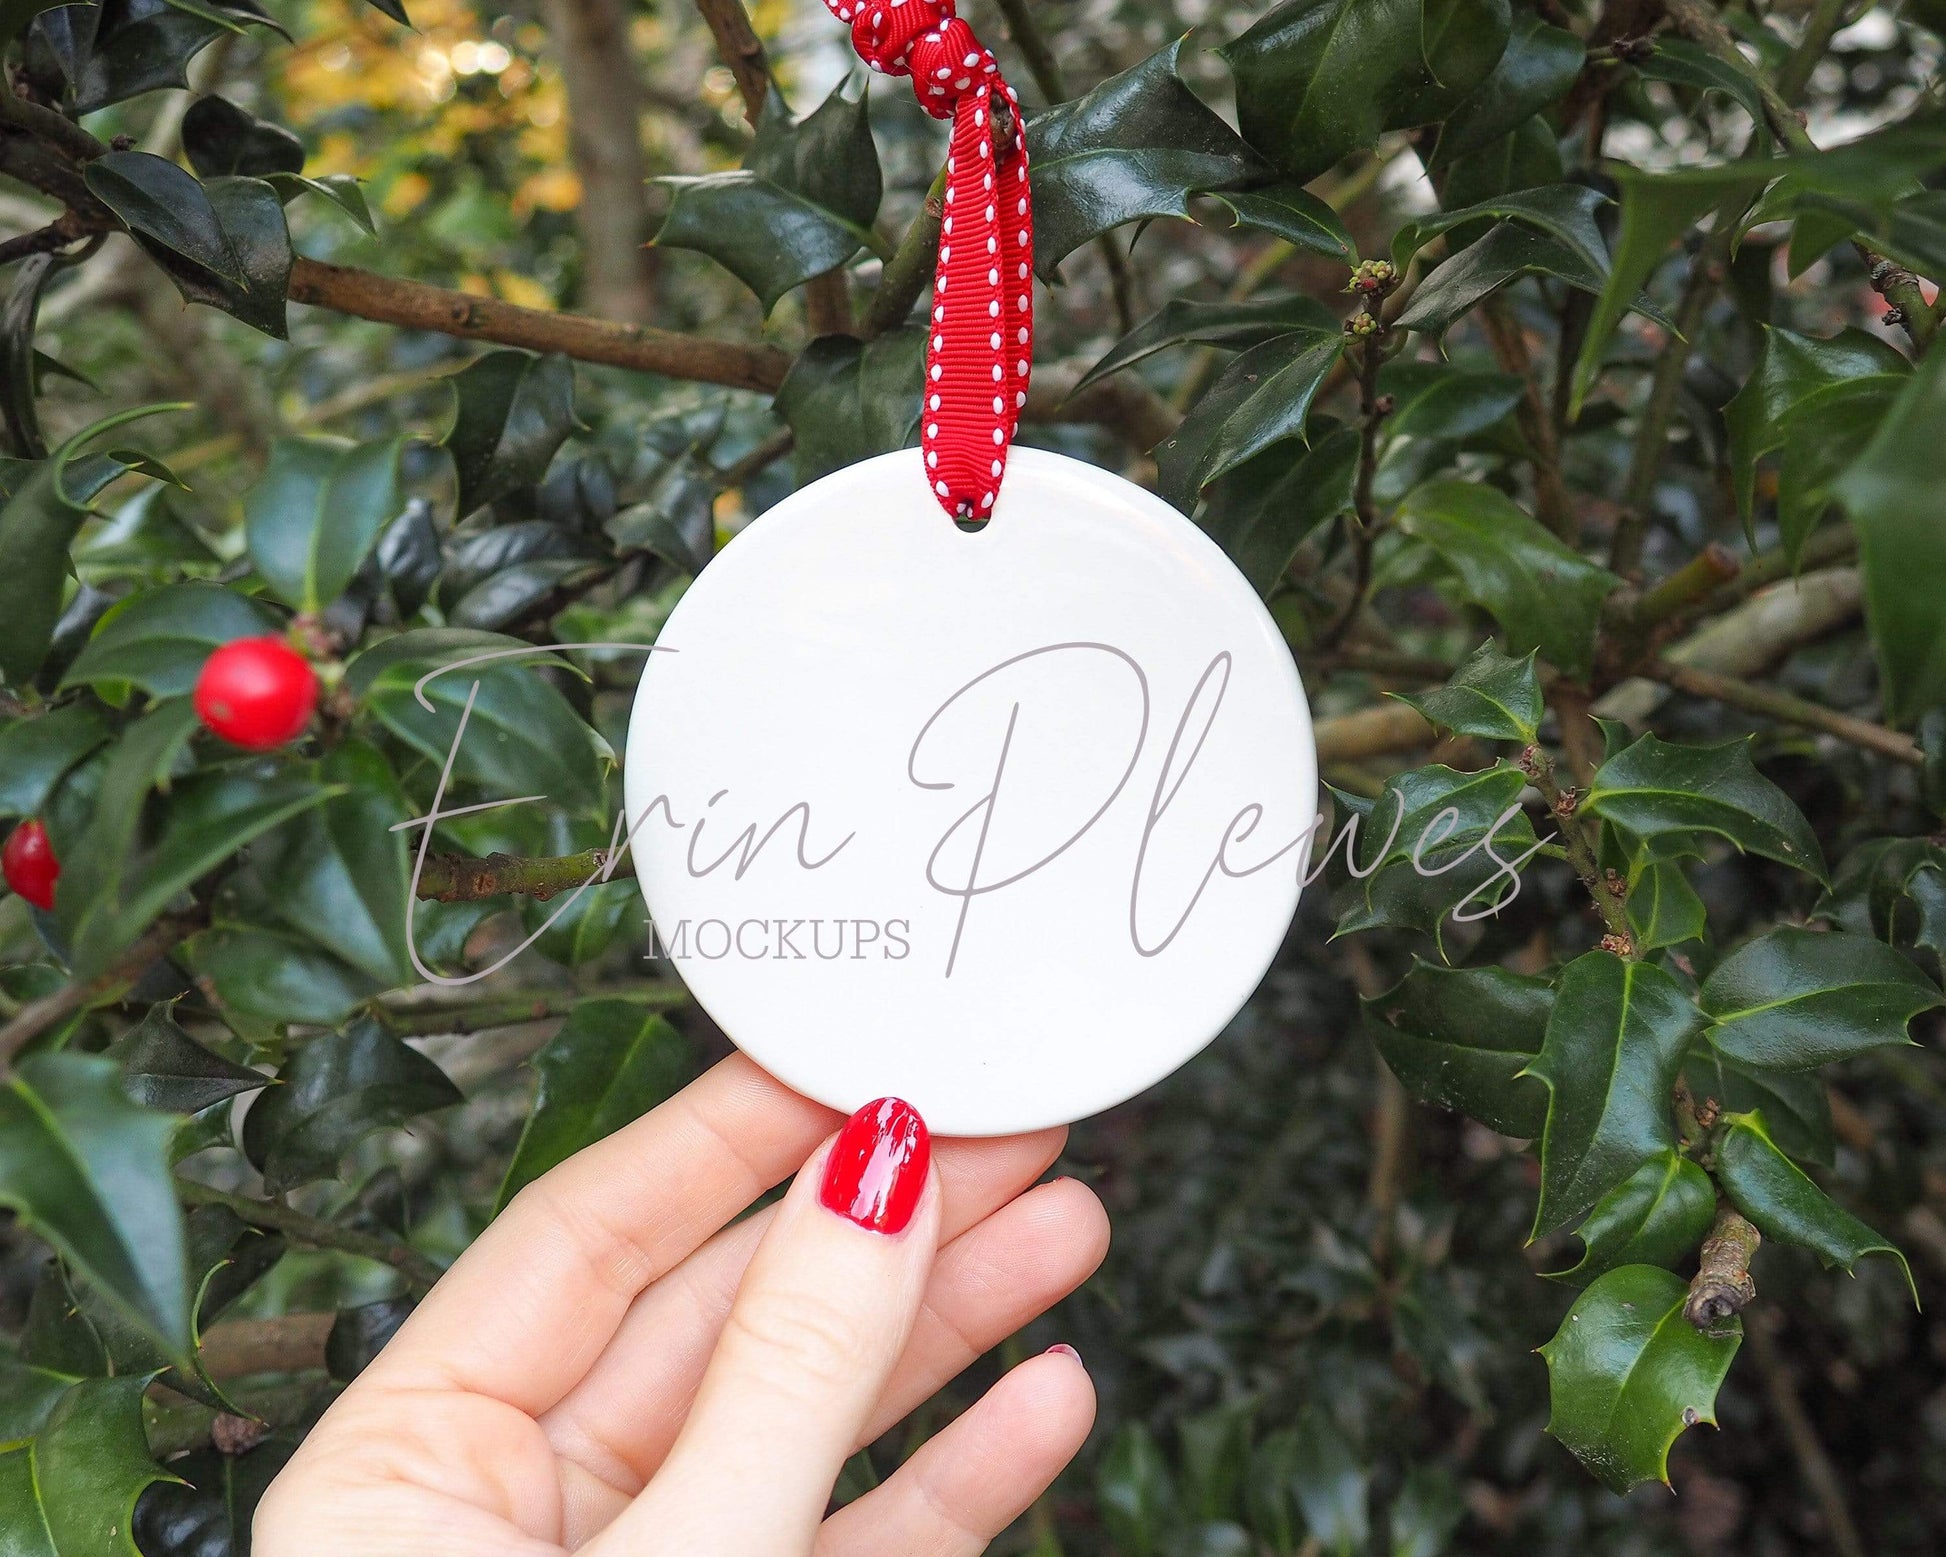 Erin Plewes Mockups Mockup Christmas mockup round ornament, white blank Holiday decoration mock-up for template design and stock photography, JPG PNG Digital Download